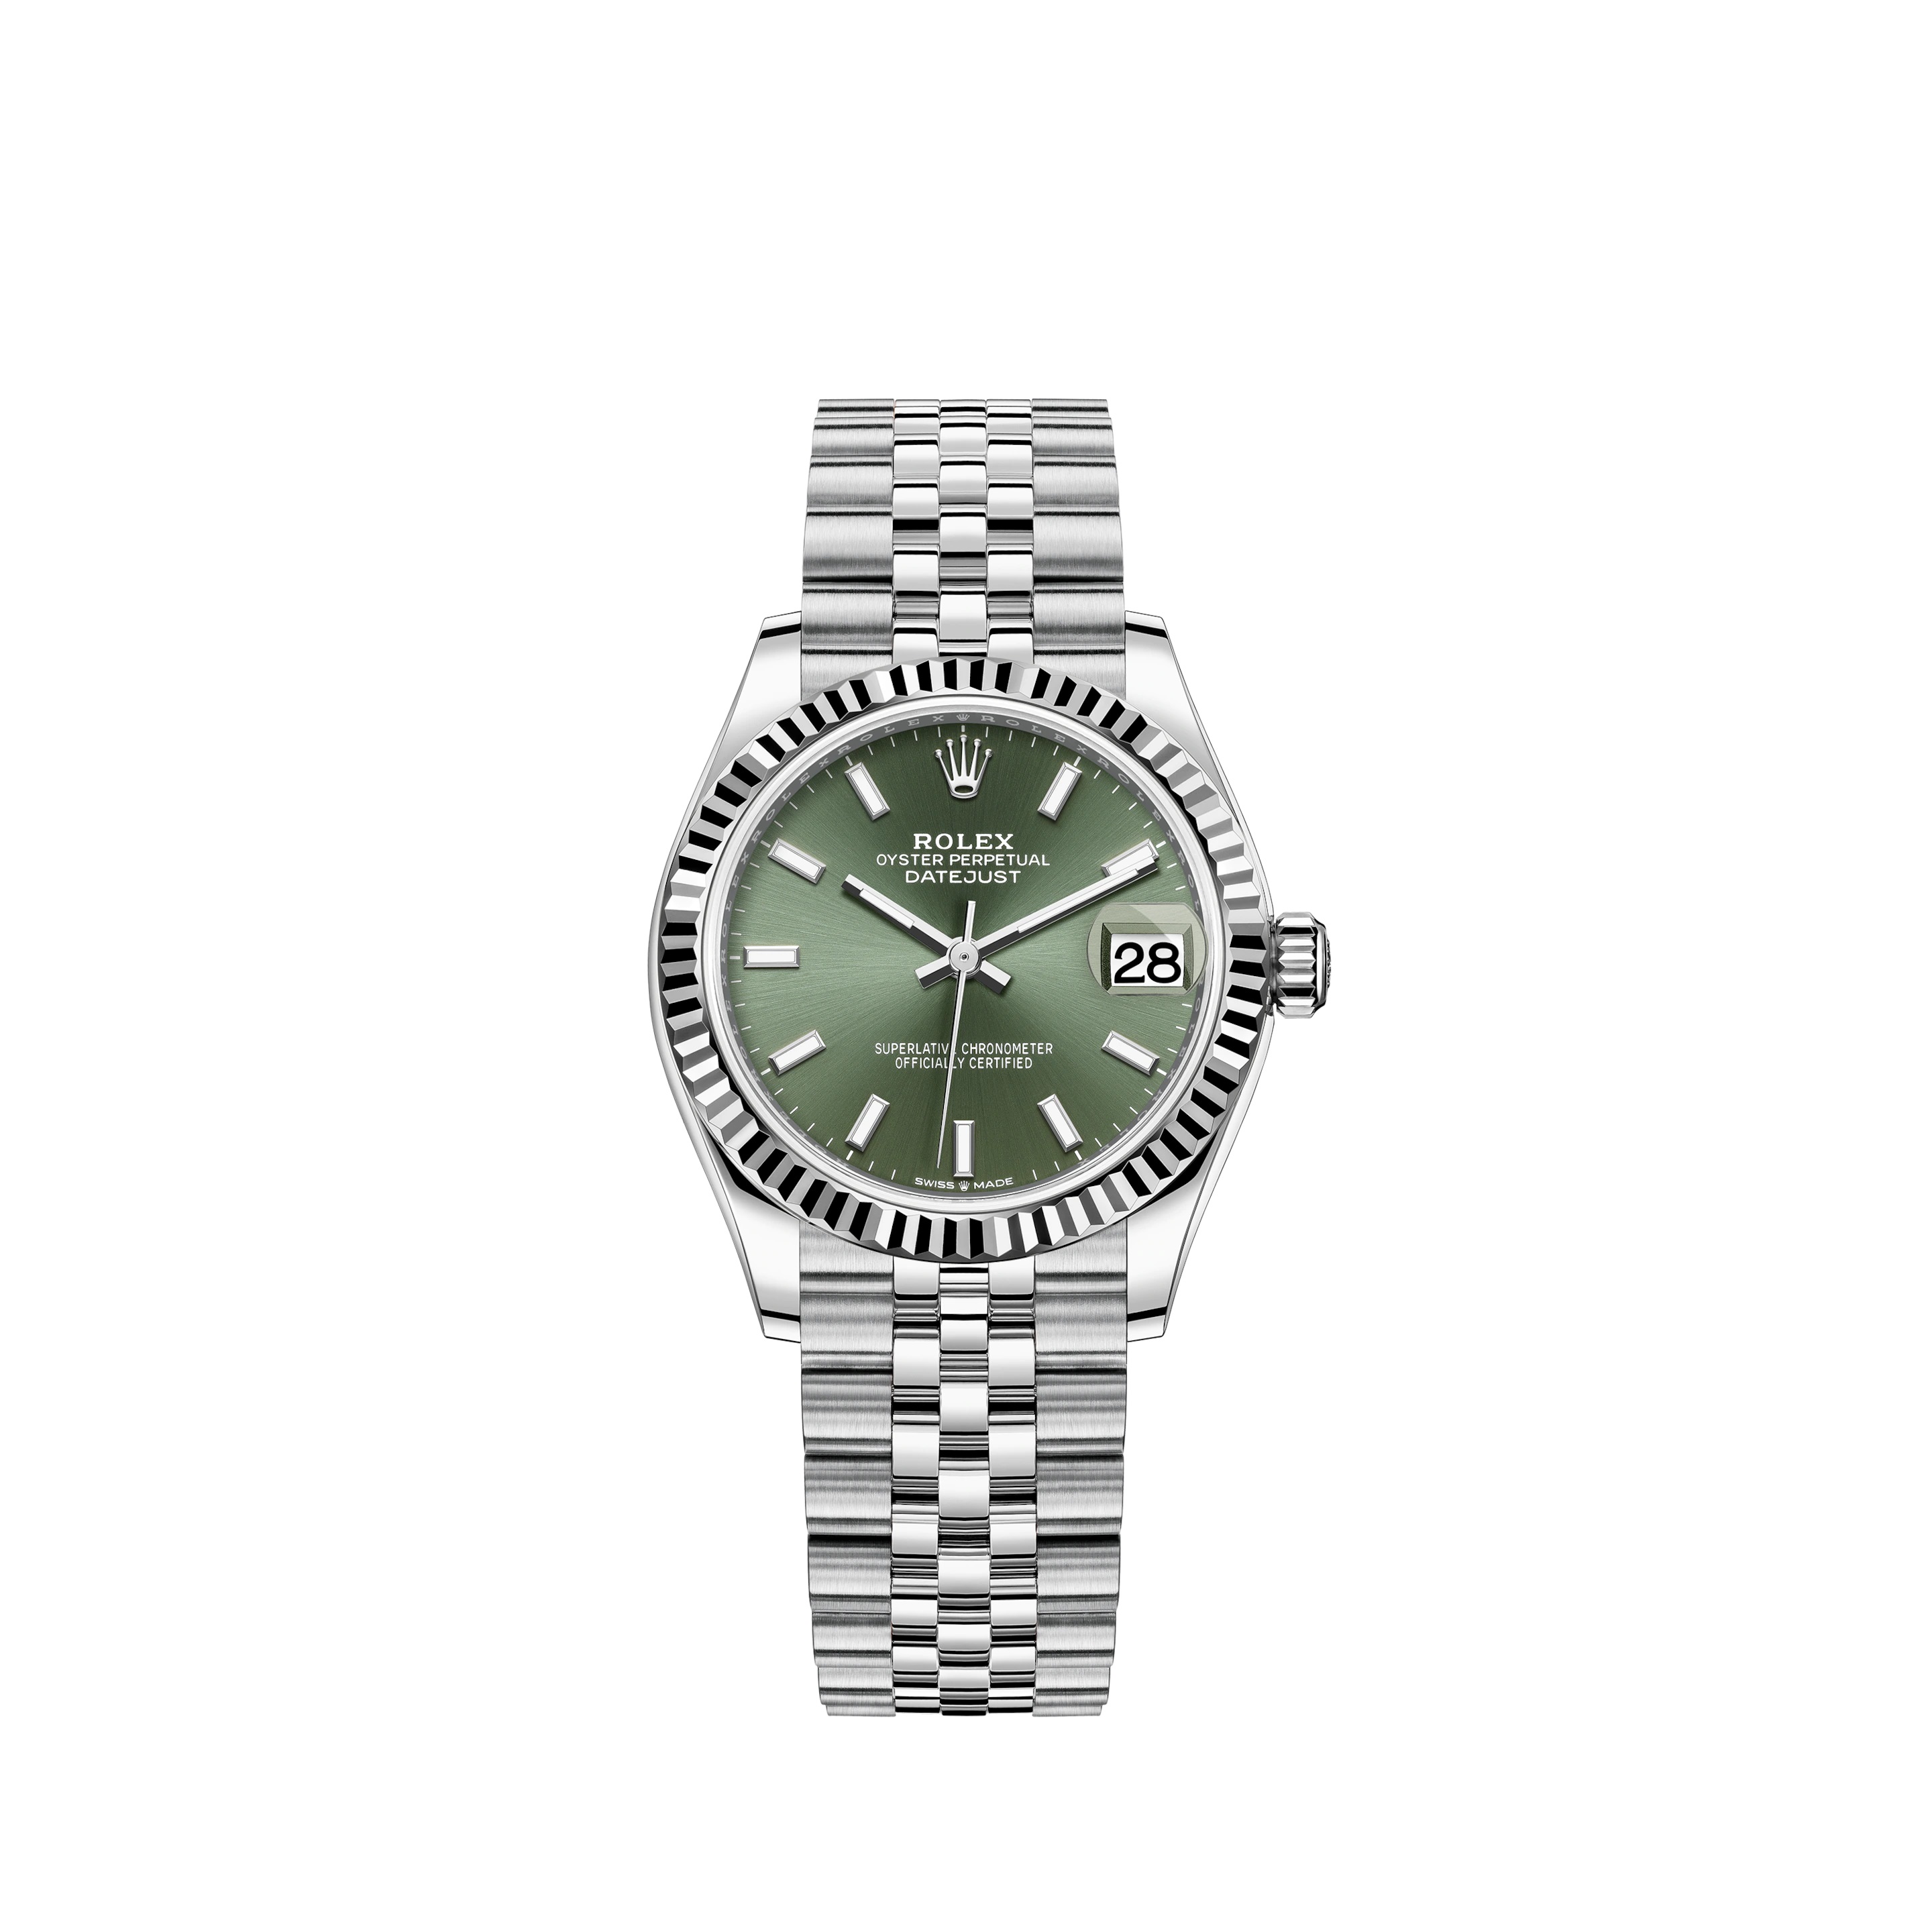 Datejust 31 278274 White Gold & Stainless Steel Watch (Mint Green)